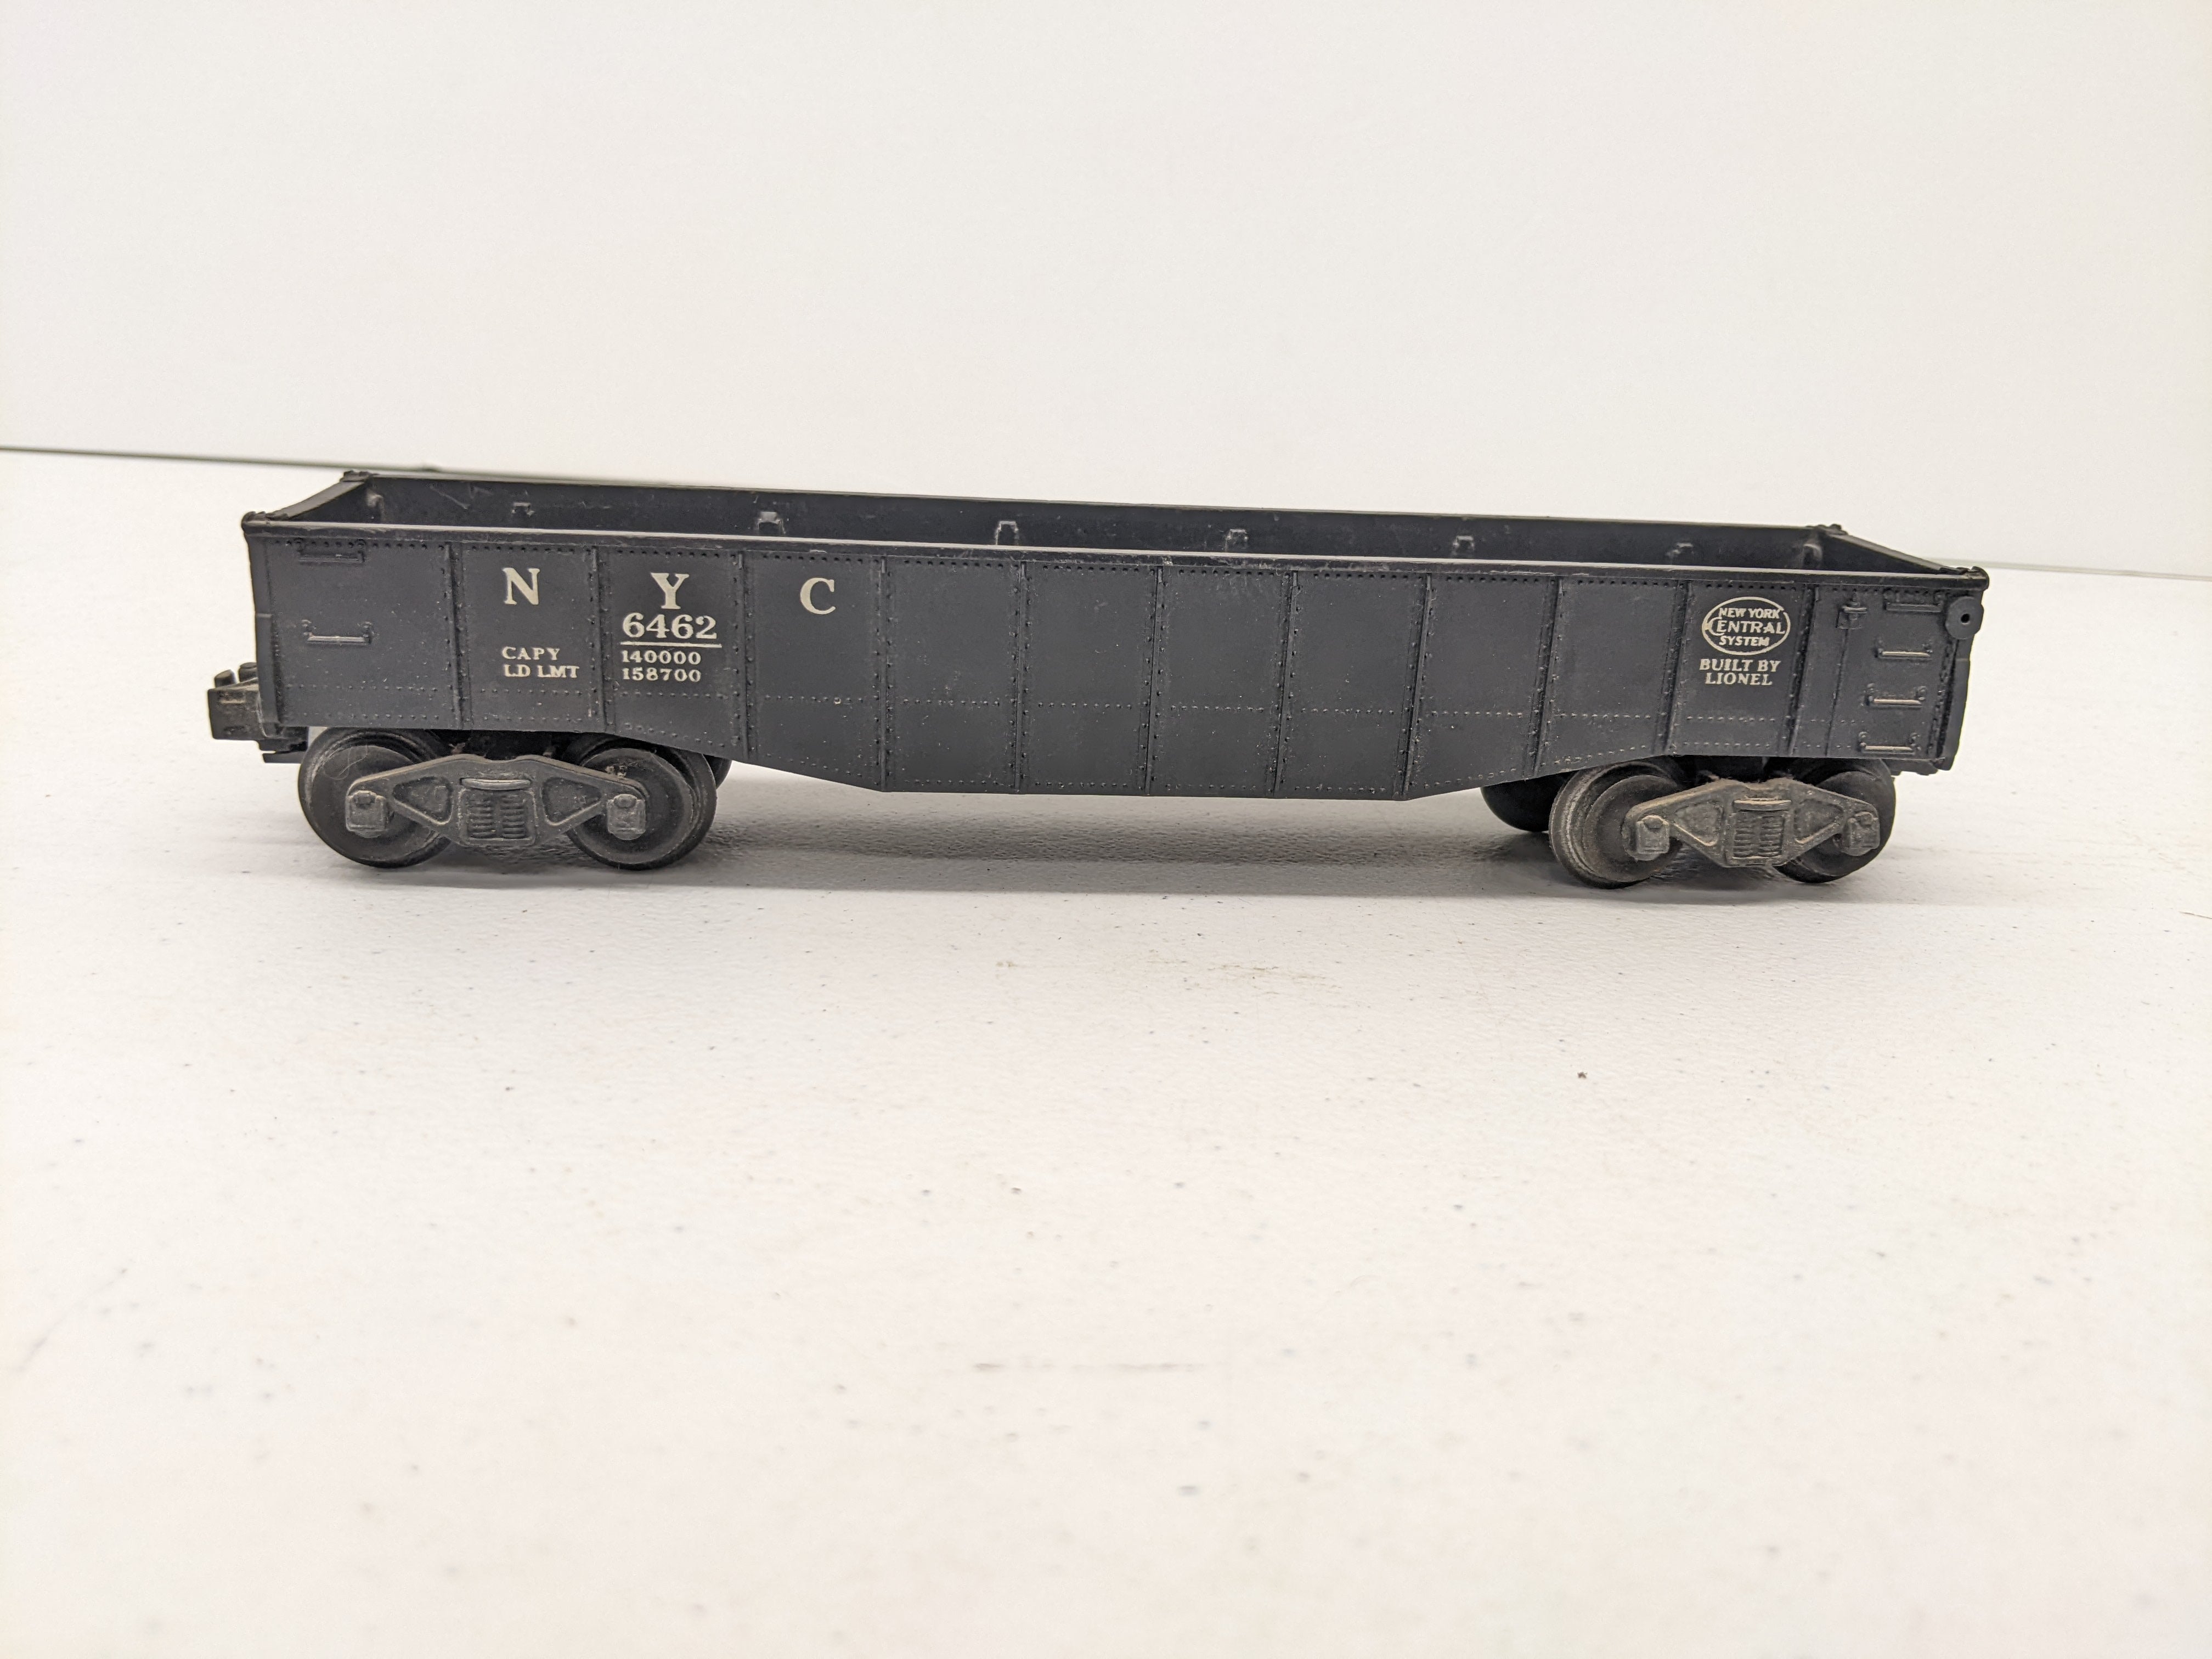 USED Lionel O Scale, Gondola with 5 loads, New York Central NYC #6462